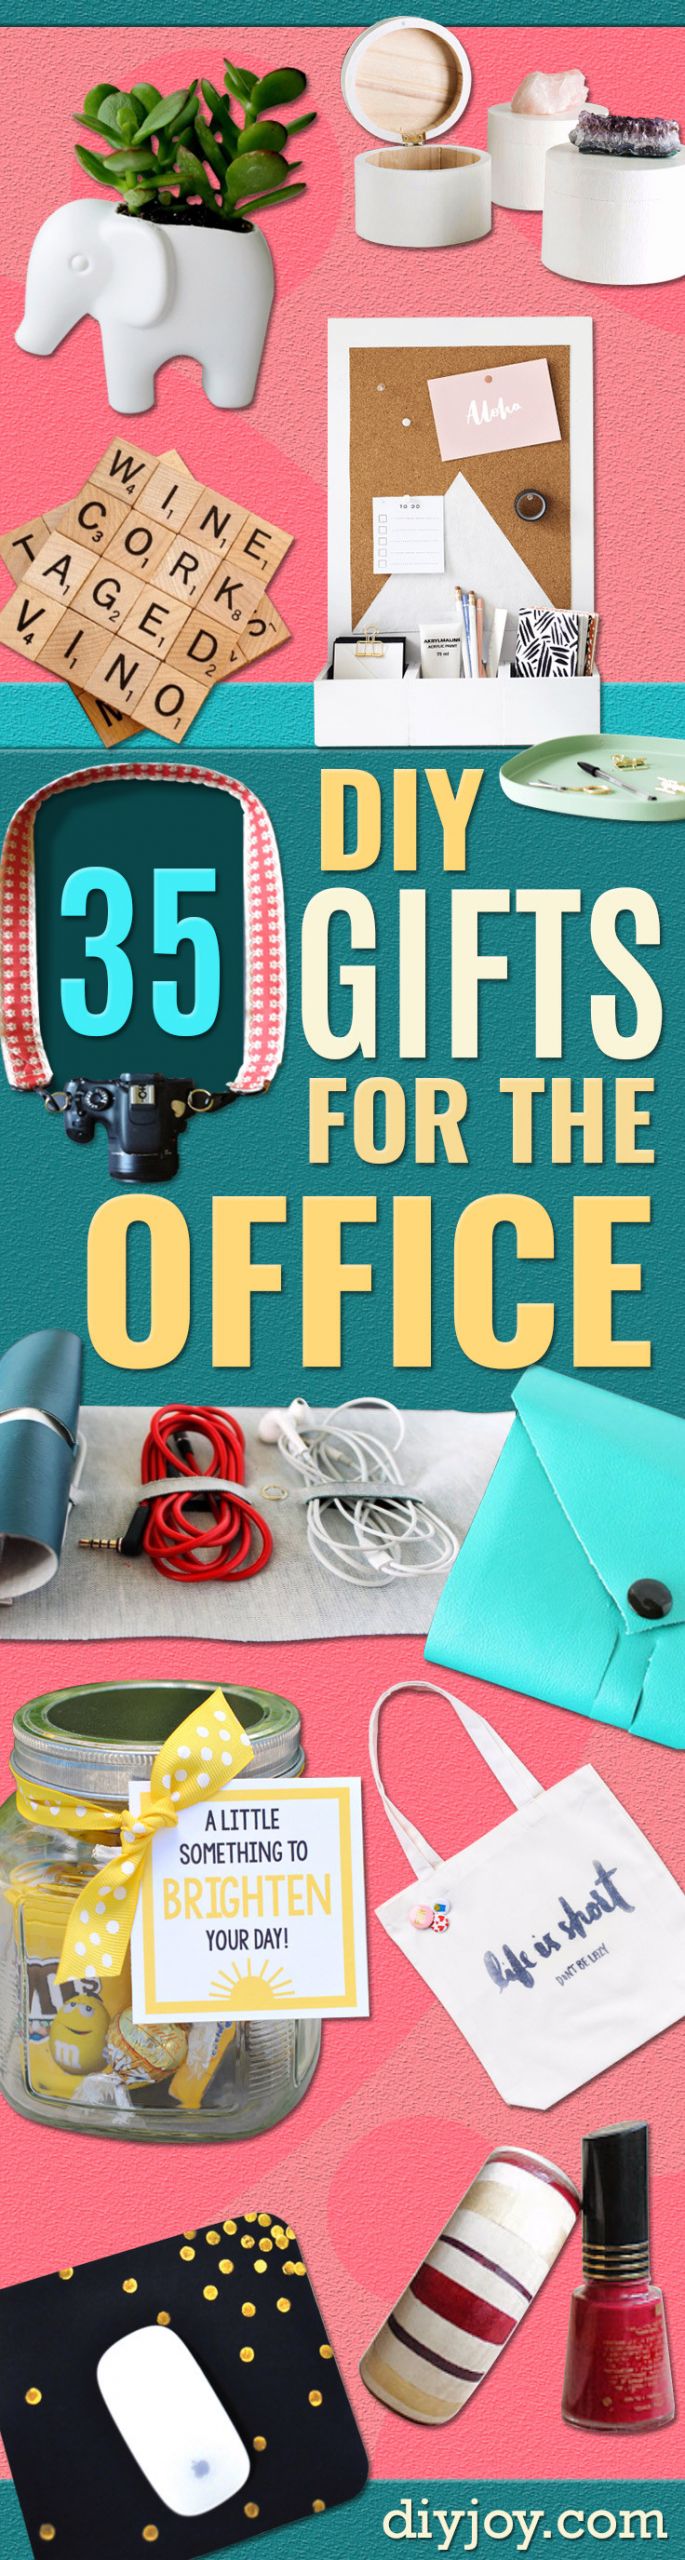 Gift Ideas Office Christmas Party
 35 DIY Gifts for The fice